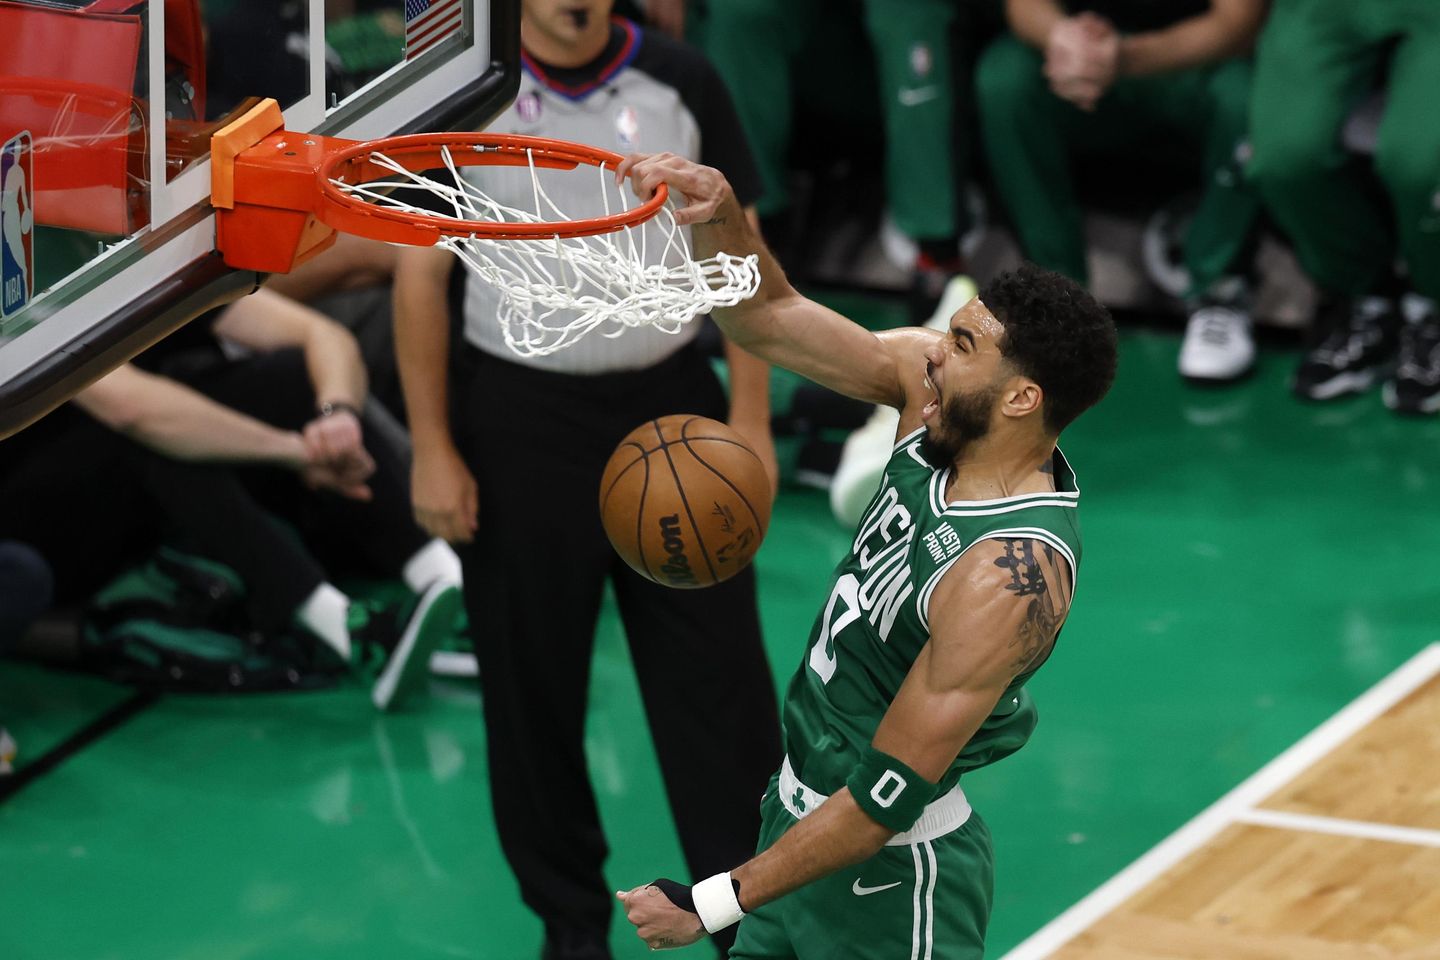 Celtics thrive on 3s, beat Heat 110-97 in Game 5 to extend East finals